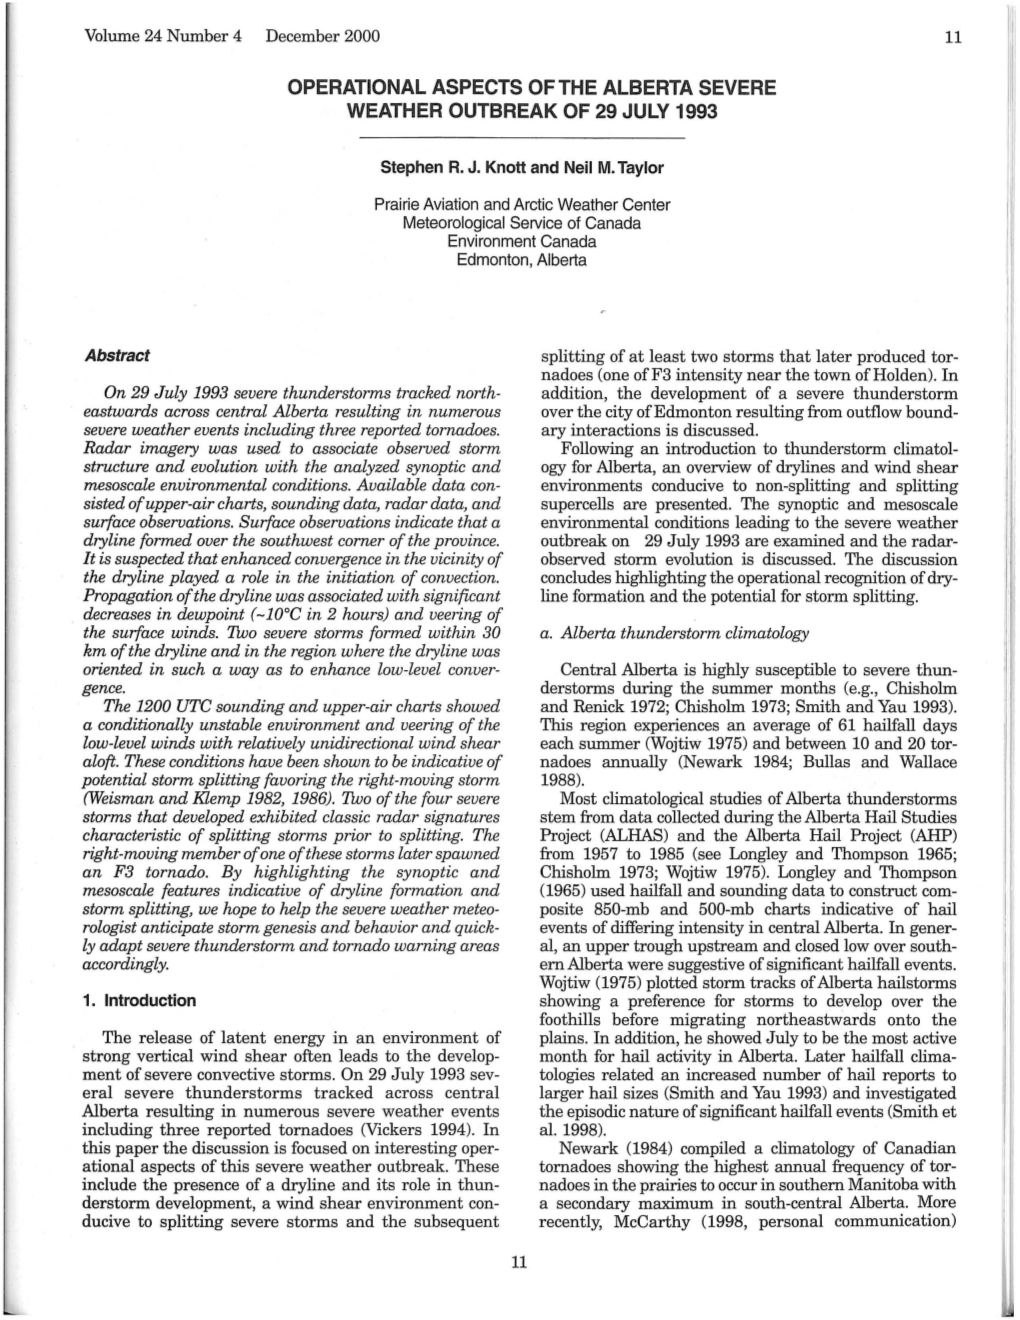 Operational Aspects of the Alberta Severe Weather Outbreak of 29 July 1993